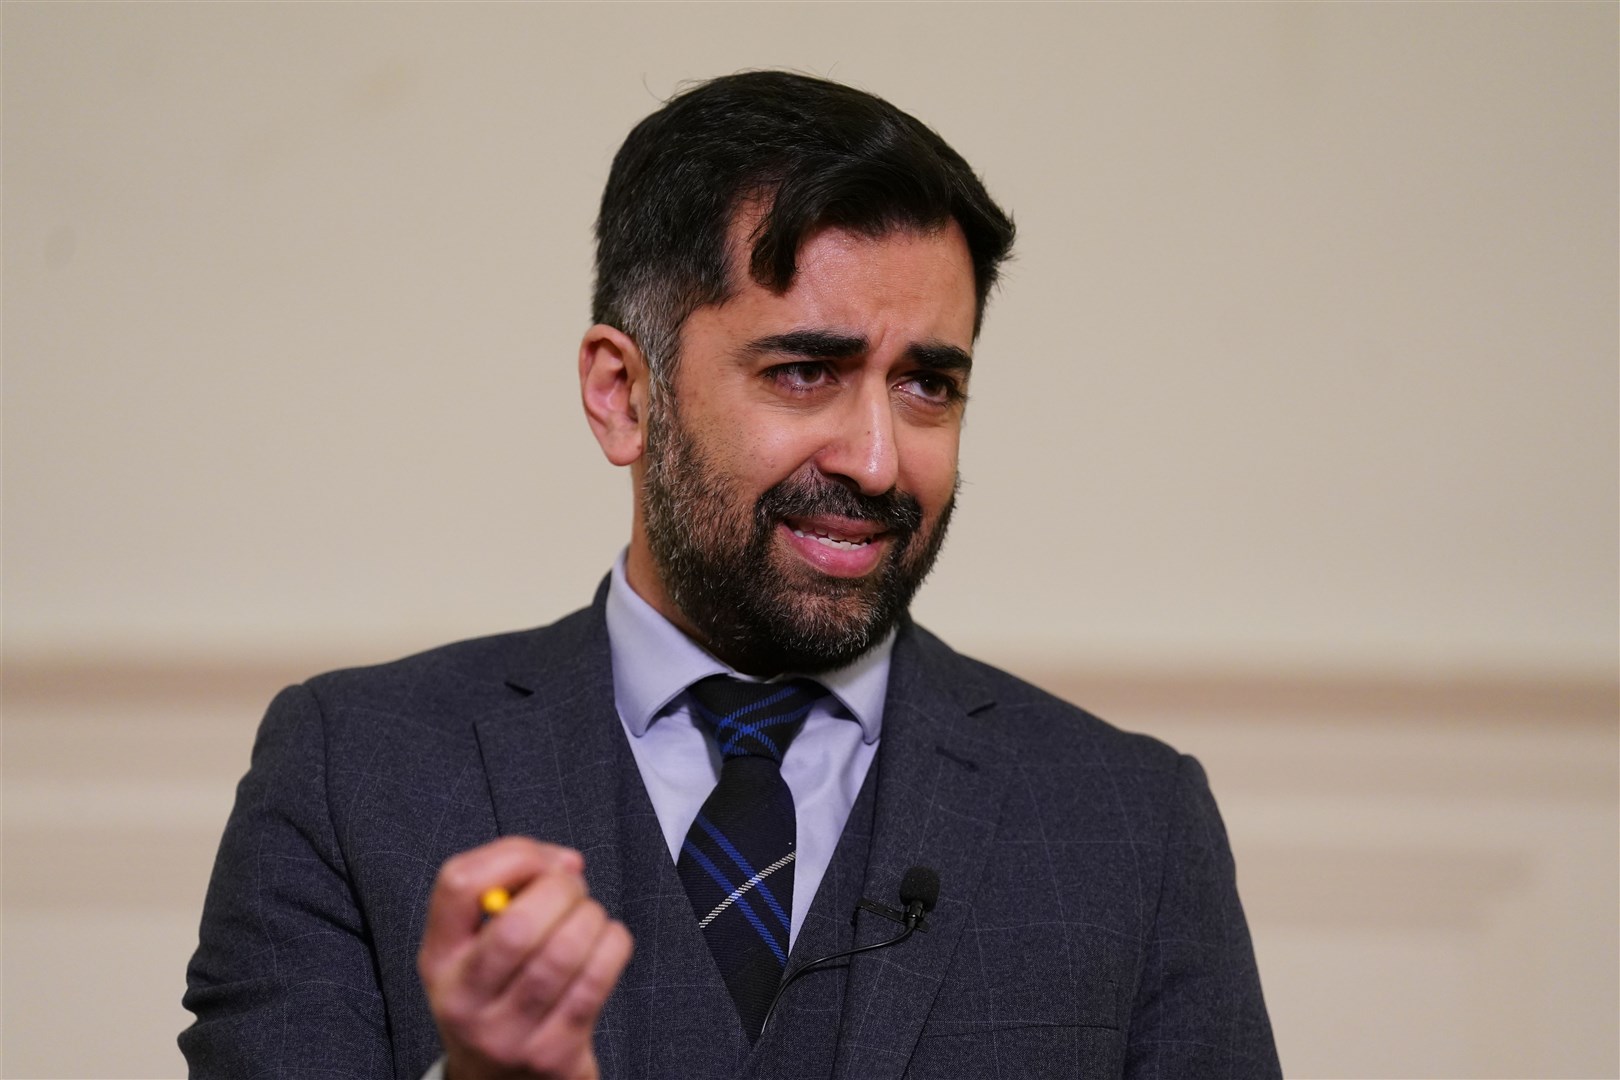 Humza Yousaf has announced he will also be running (Andrew Milligan/PA)